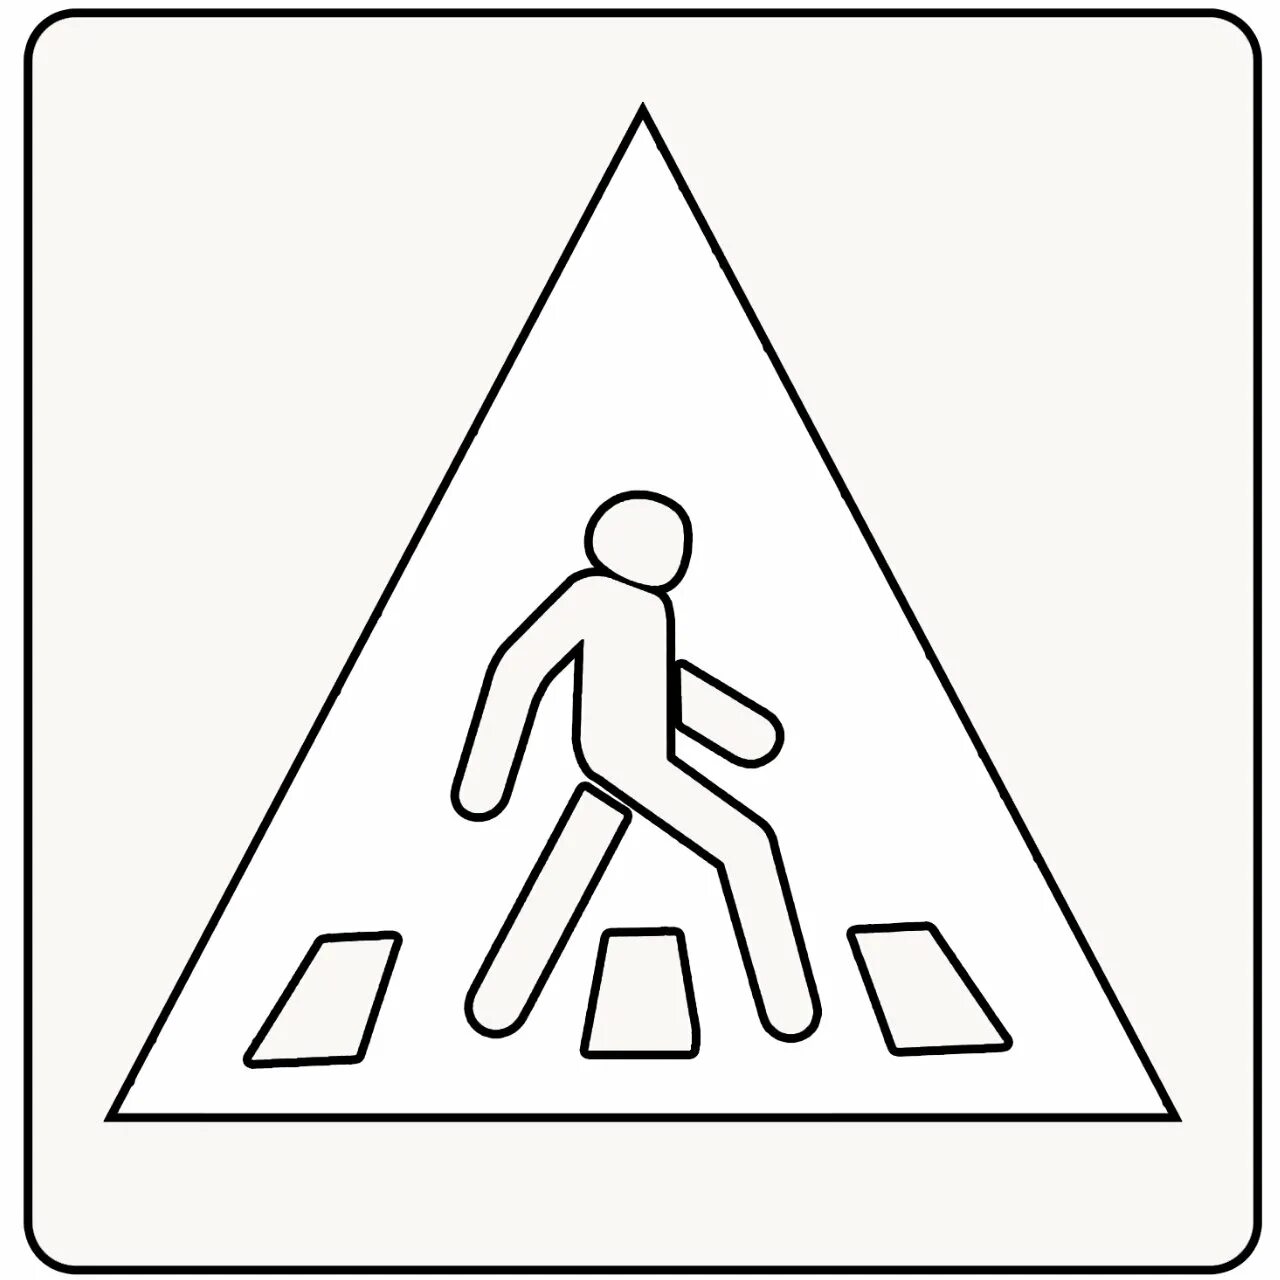 Coloring soft pedestrian signs